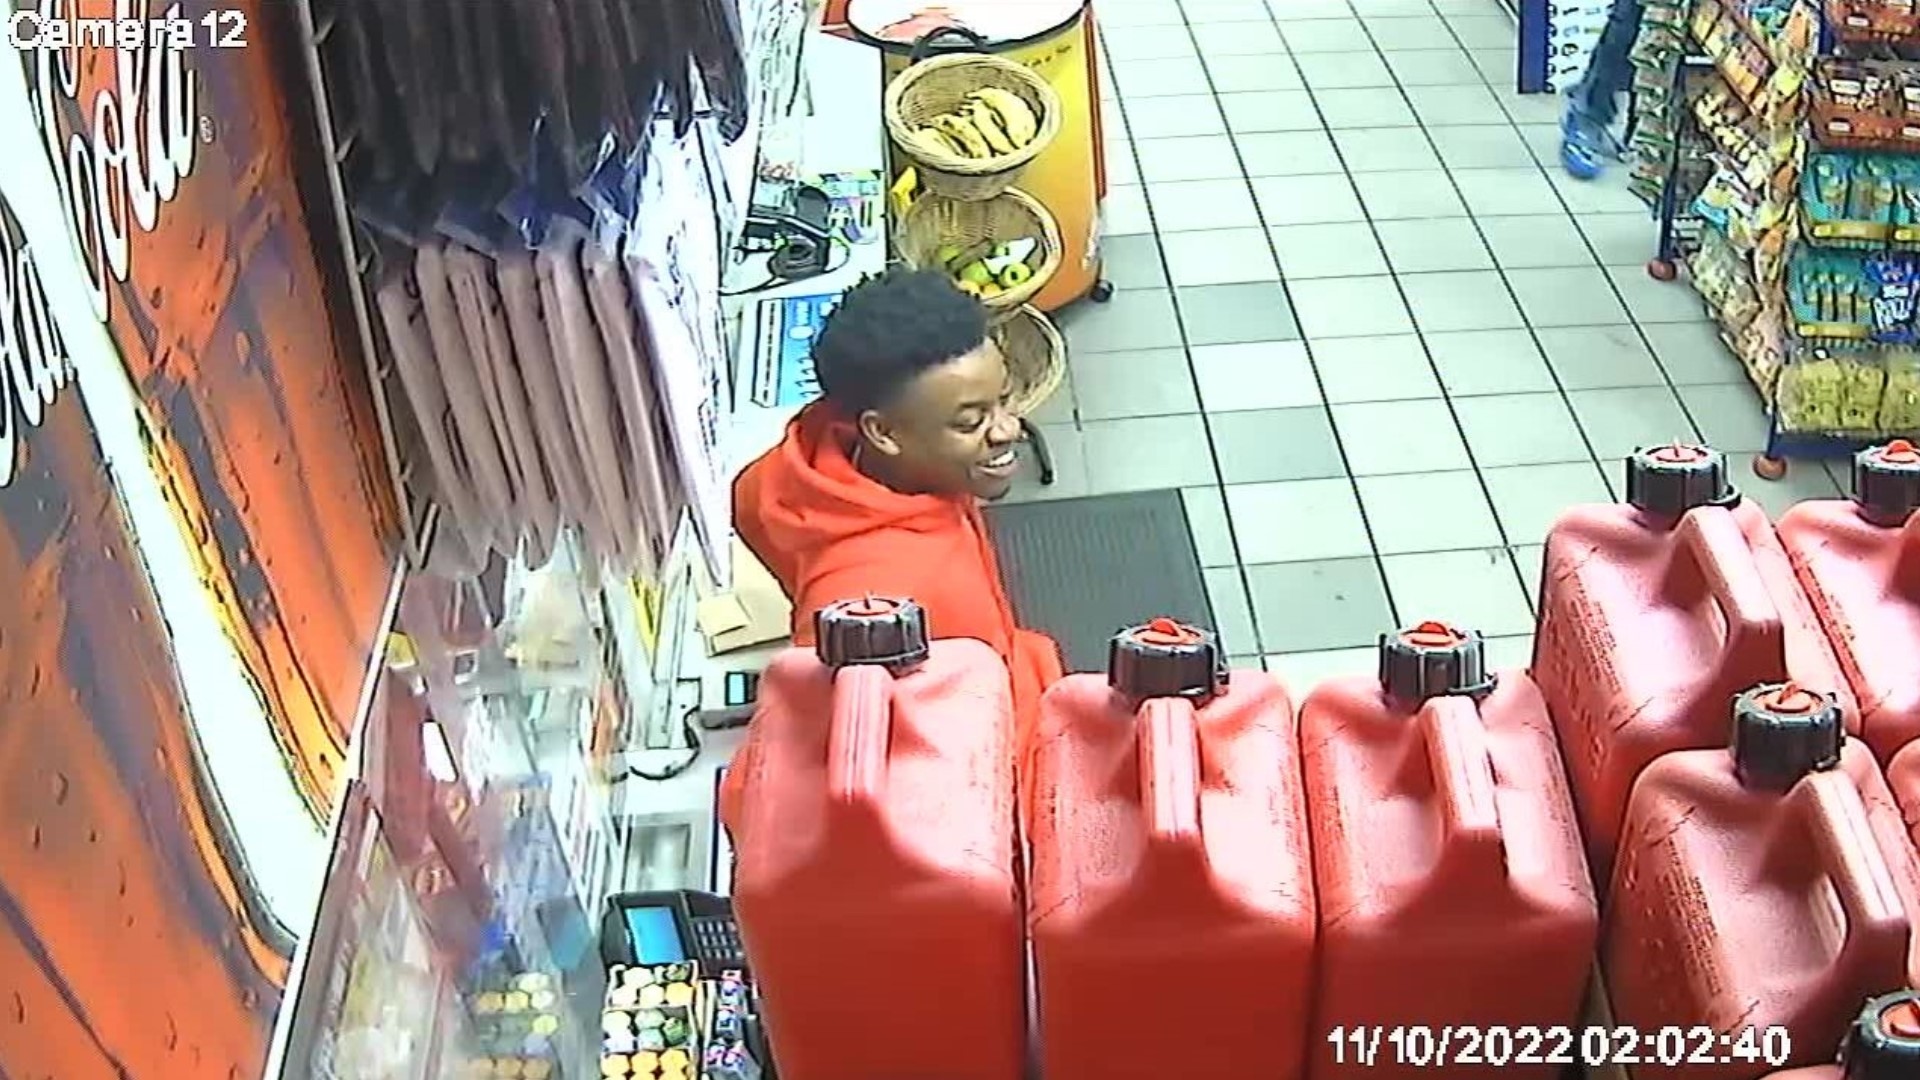 Crime Stoppers released new photos of the suspect wearing all red inside the gas station along with a $2,000 reward for anyone that can identify him.